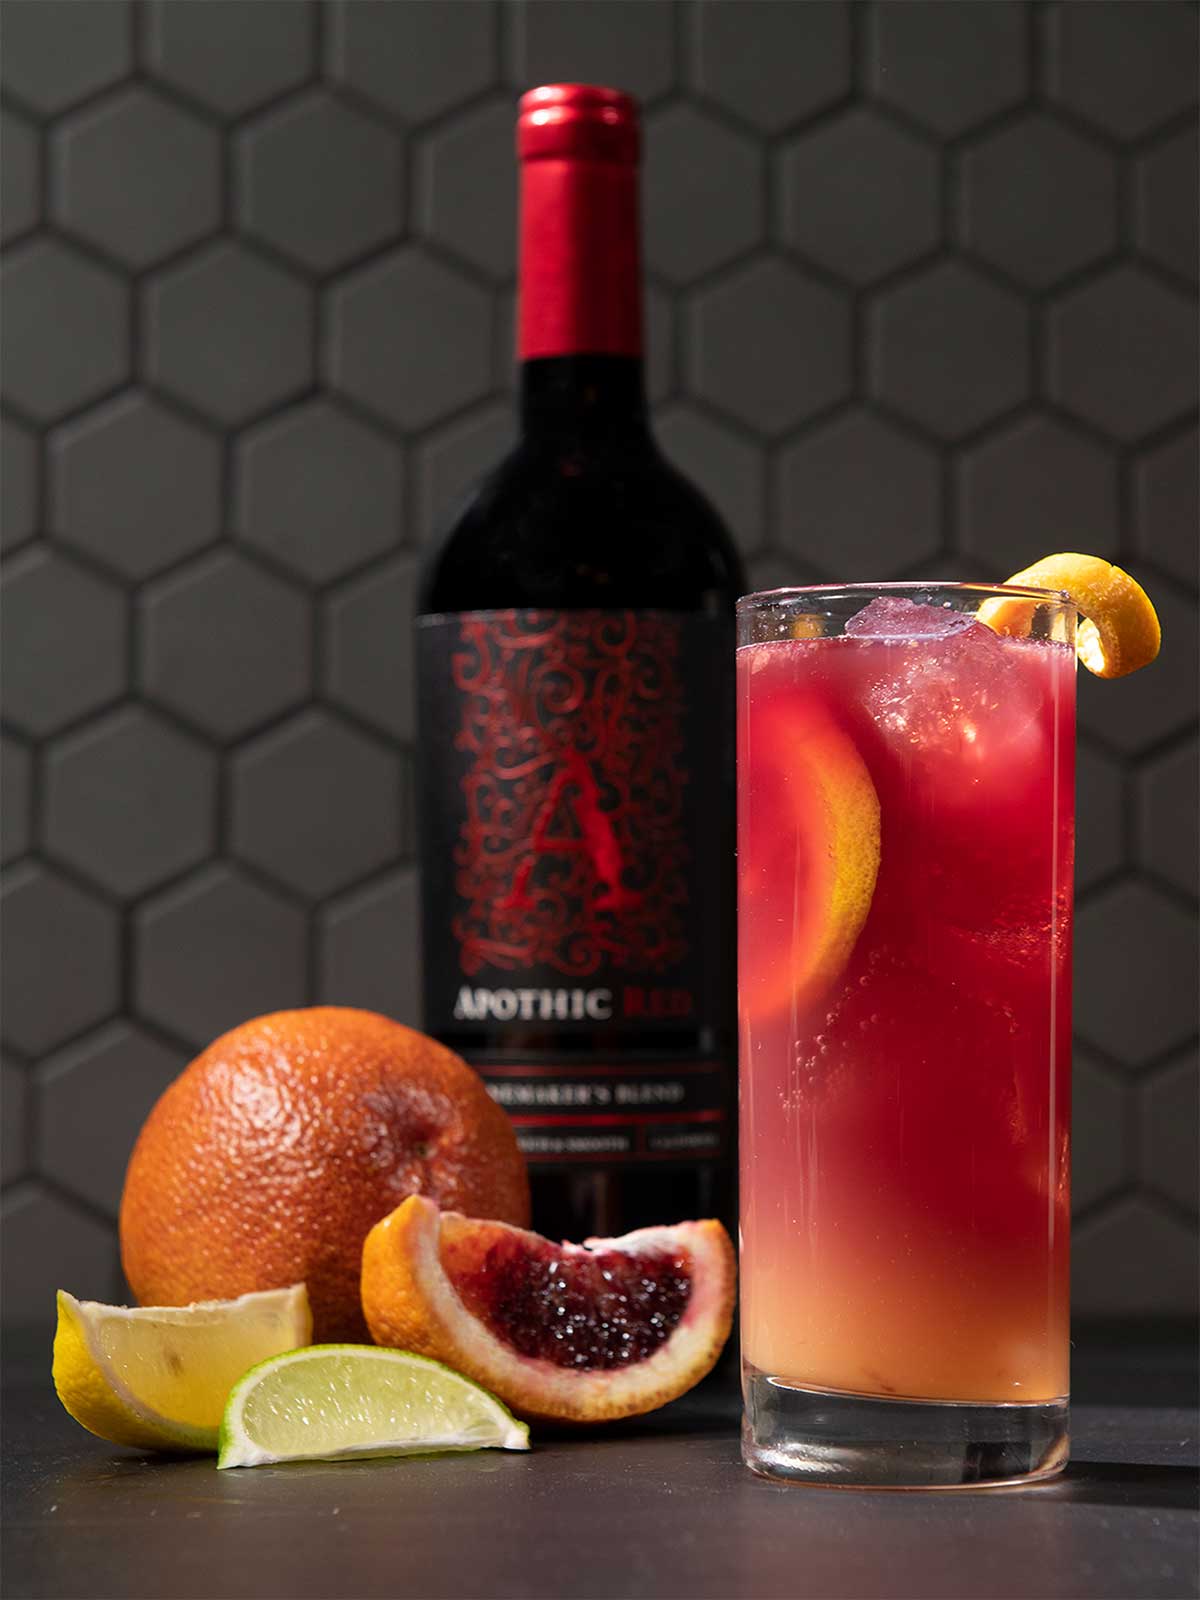 A glass of Apothic sunrise cocktail with citrus and a bottle of Apothic Red